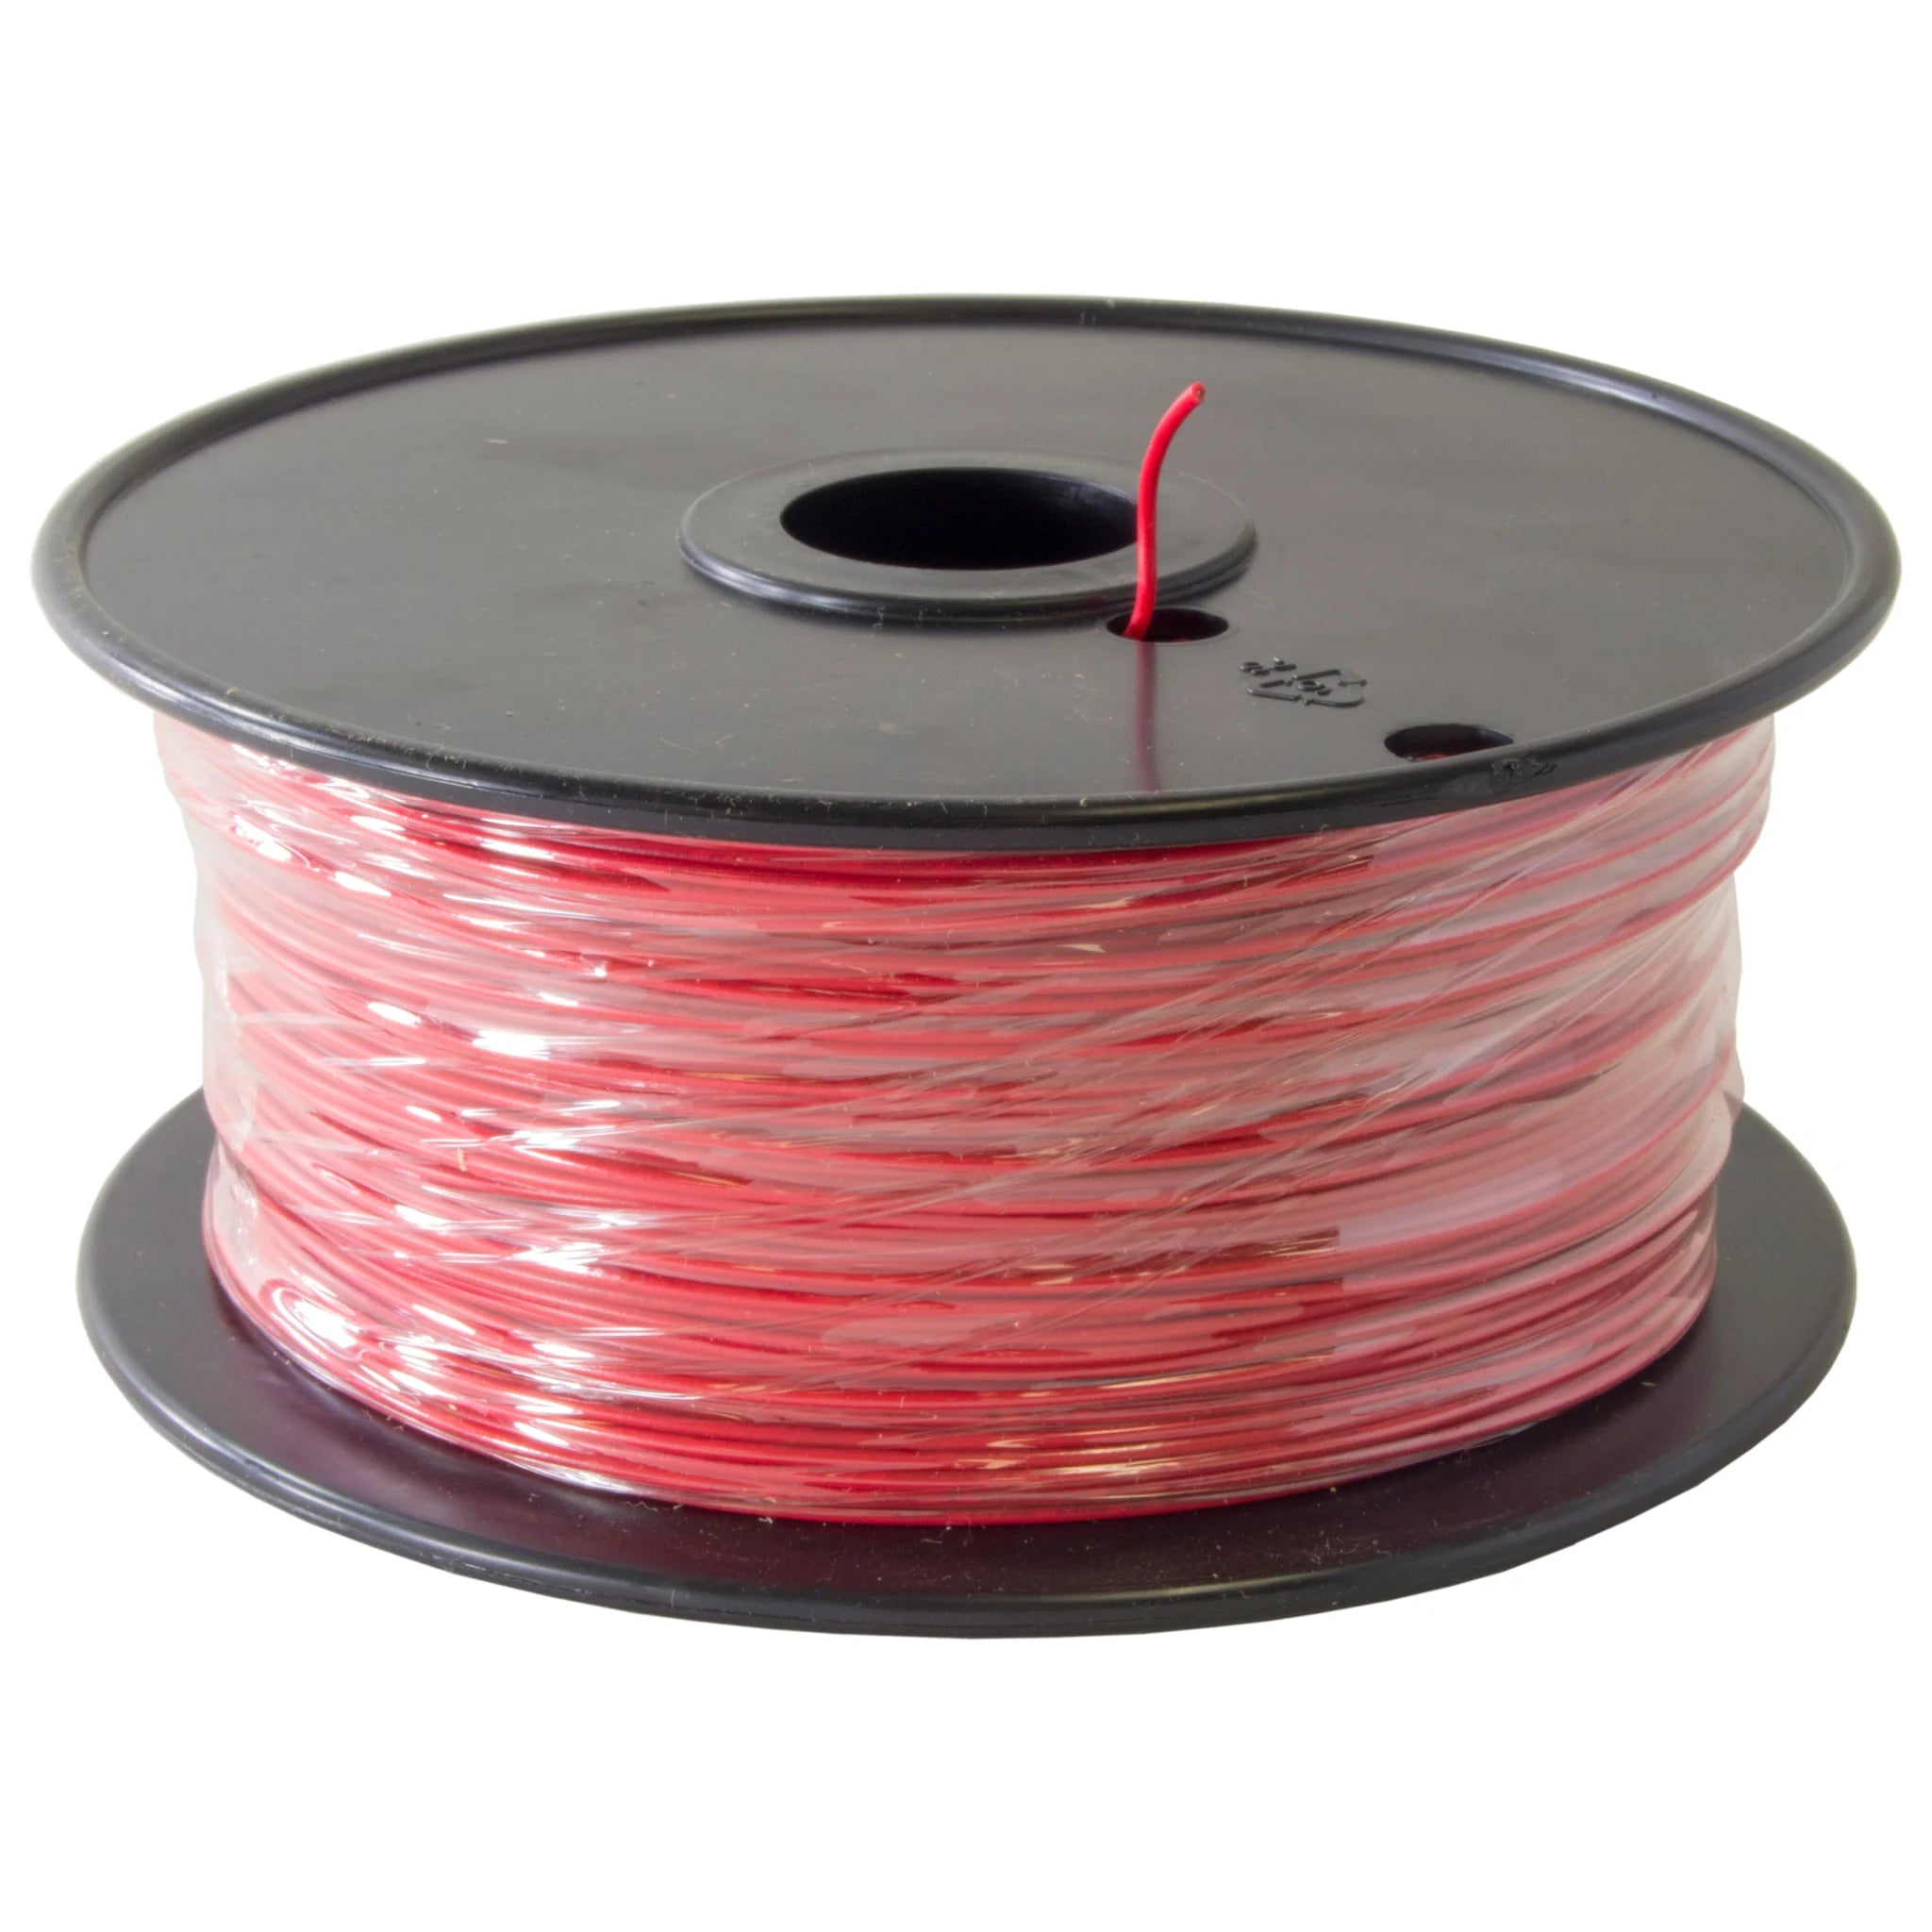 22AWG Solid Pre-tinned Hookup Wire 6-Pack 33Ft each (Red, Black